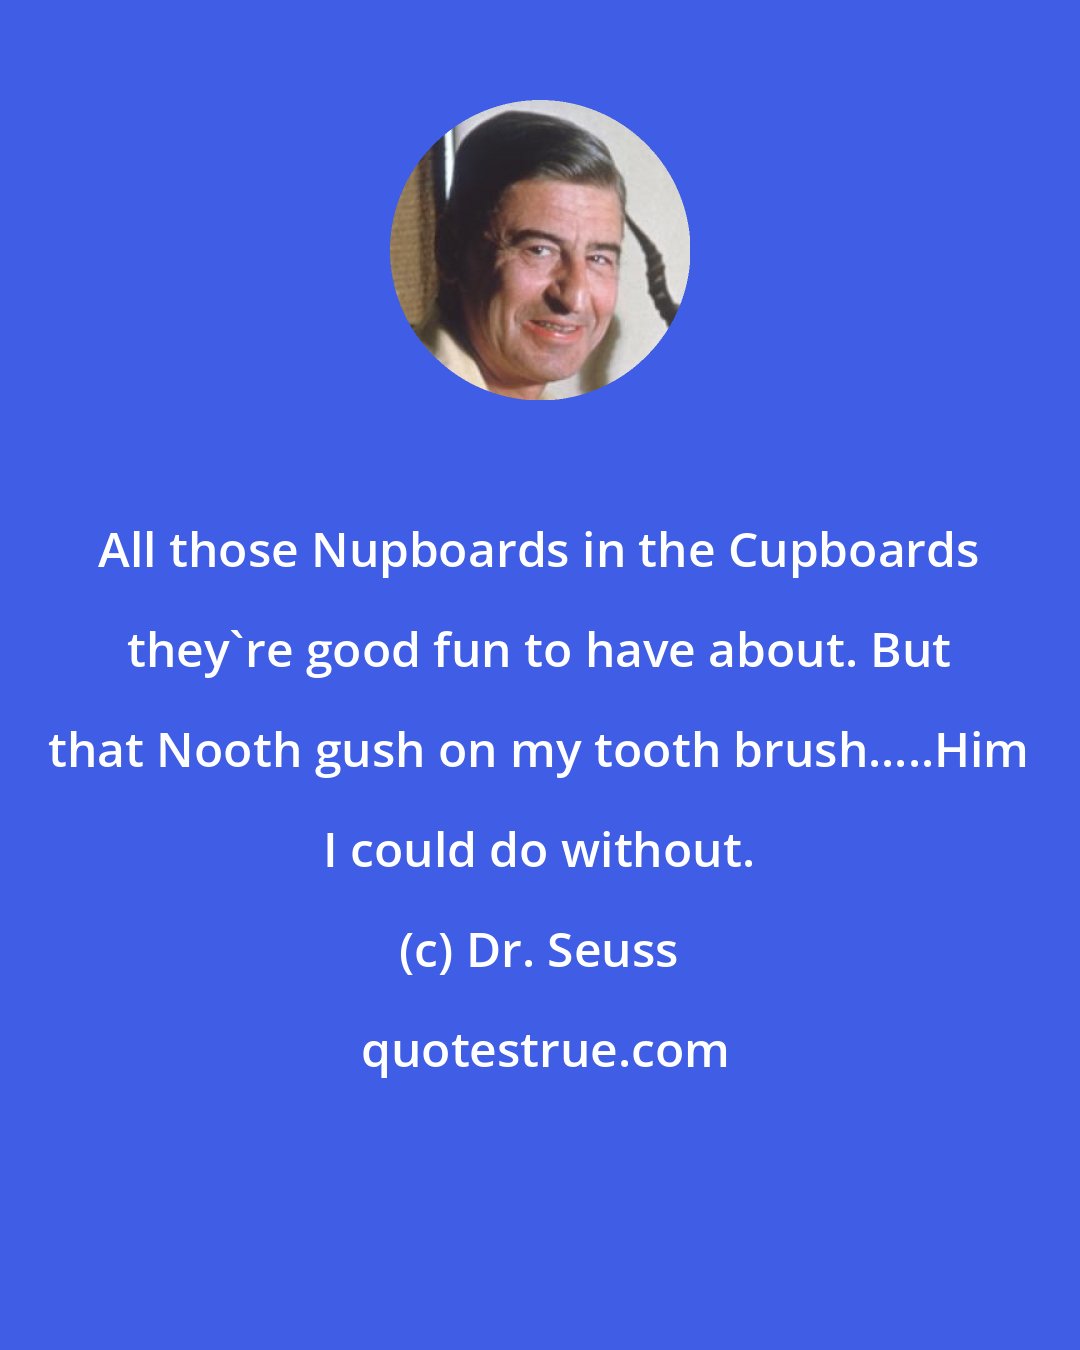 Dr. Seuss: All those Nupboards in the Cupboards they're good fun to have about. But that Nooth gush on my tooth brush.....Him I could do without.